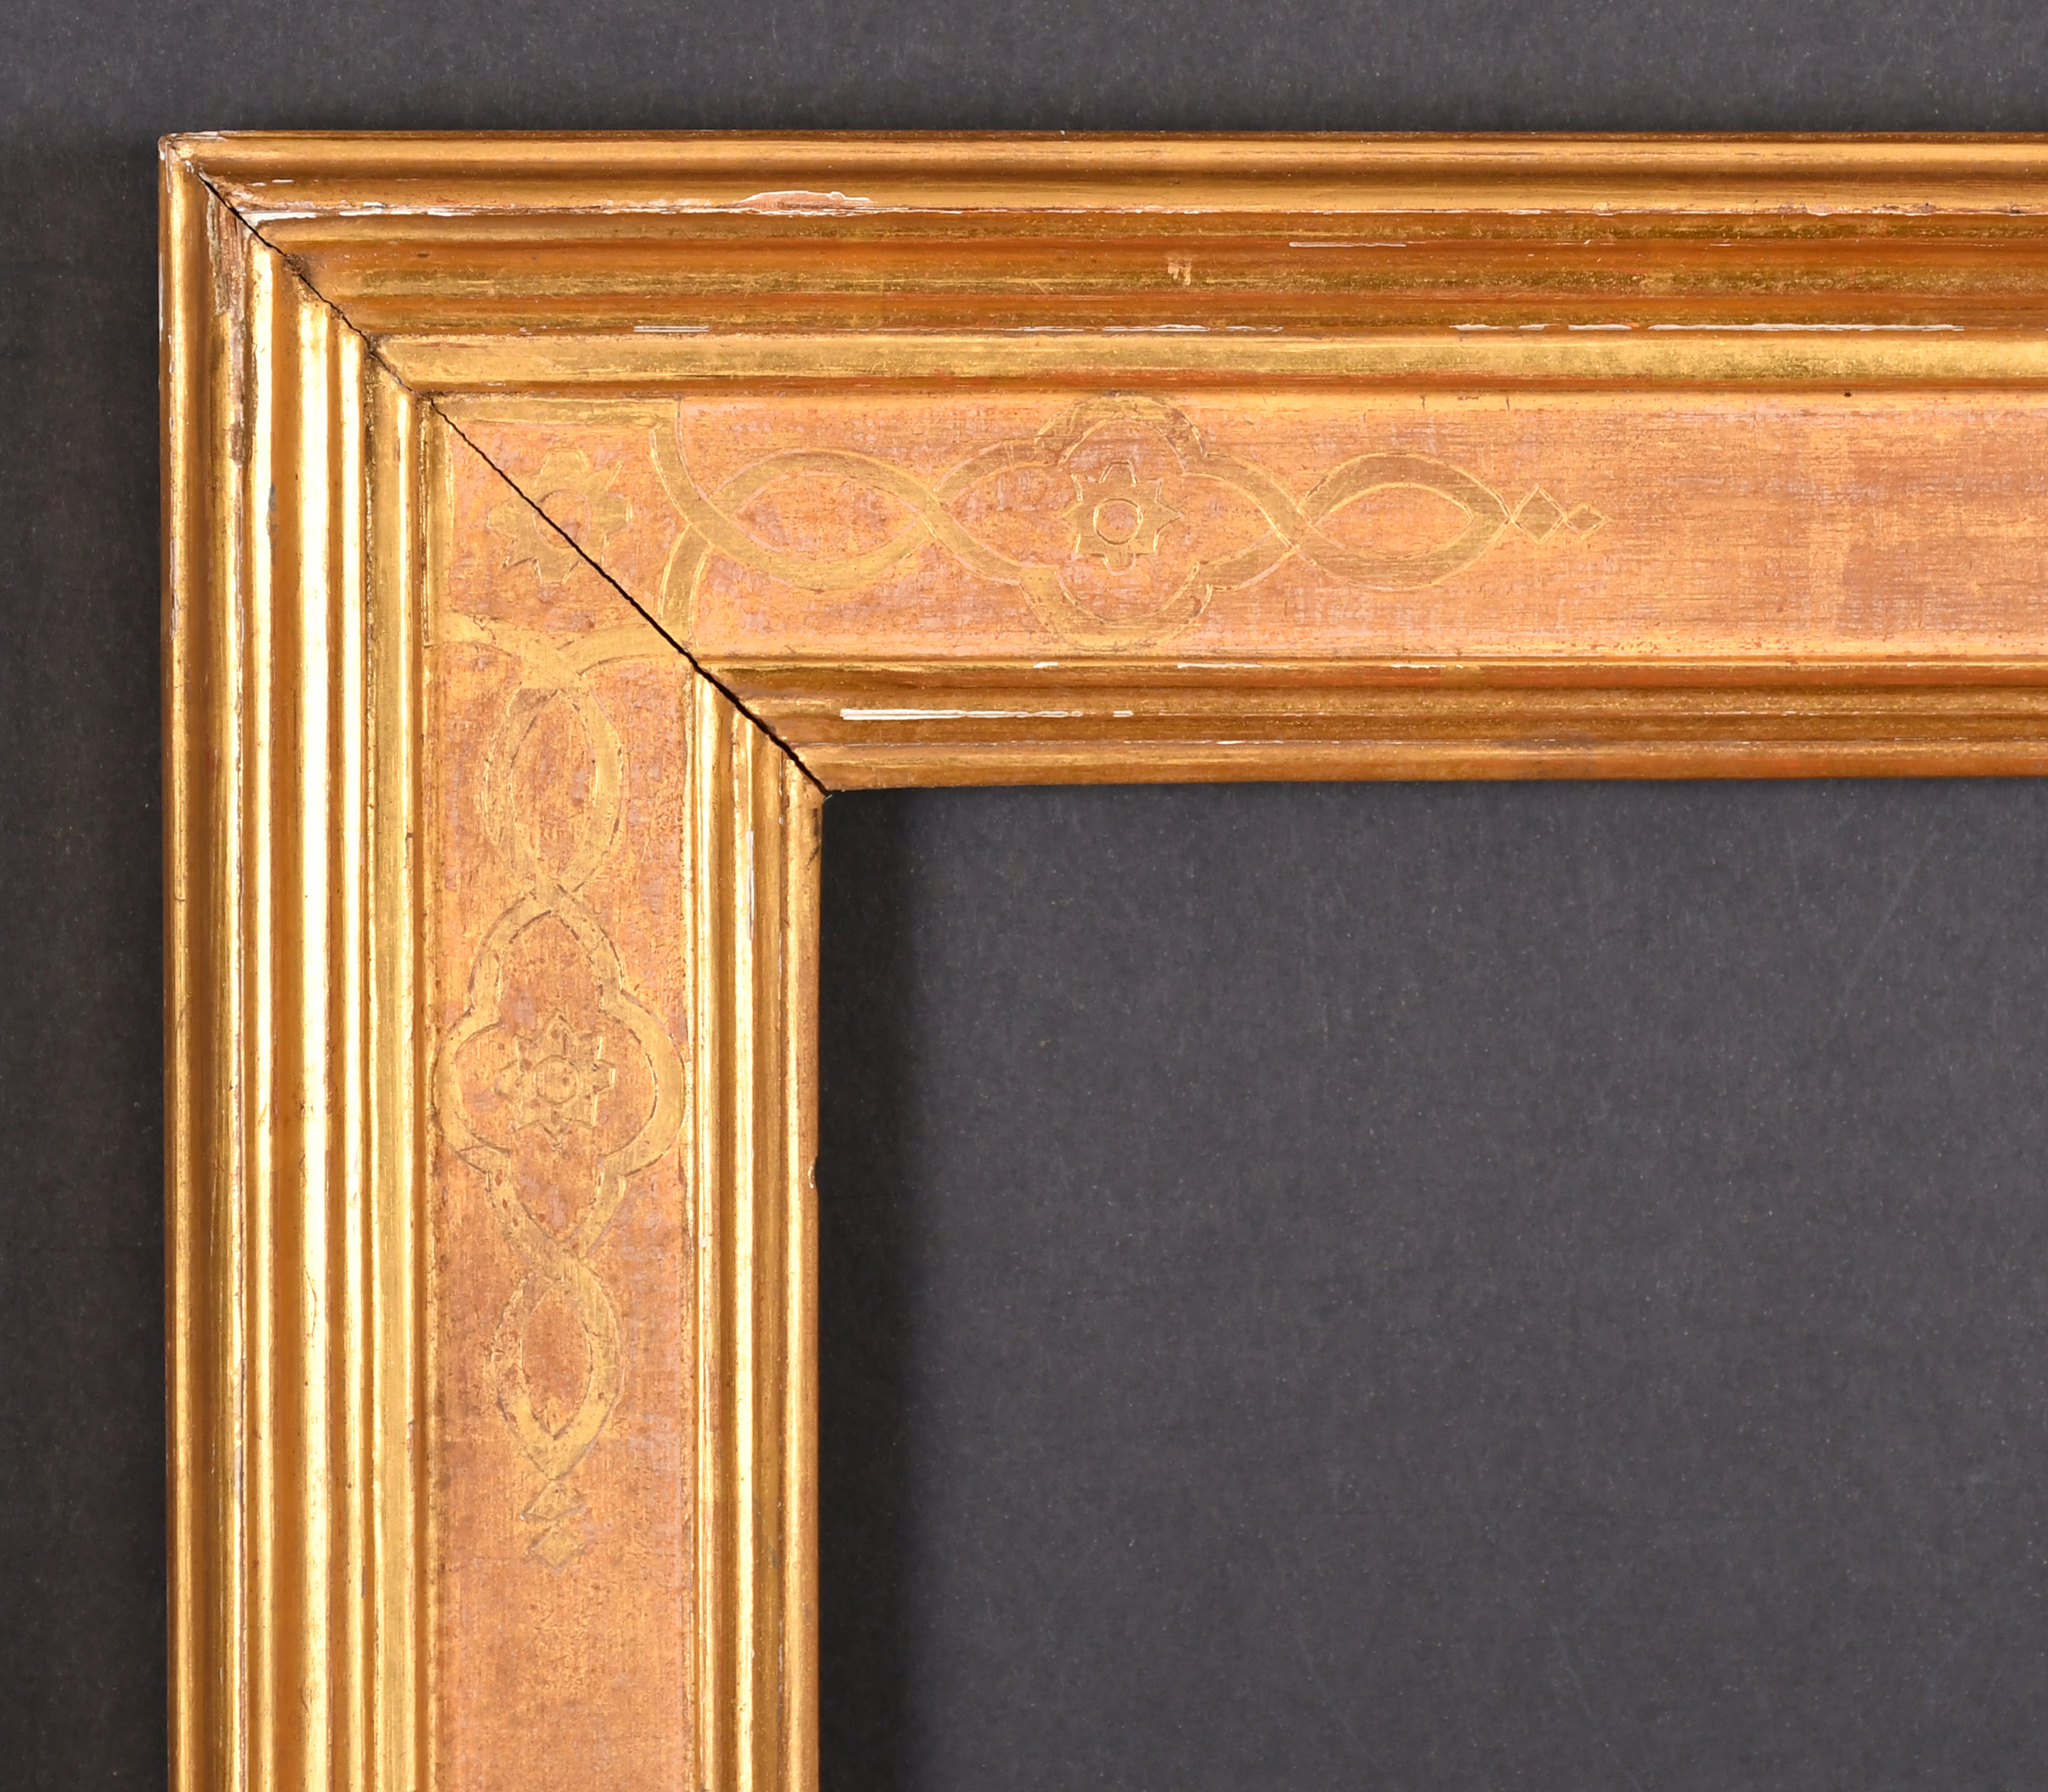 20th Century English School. A Gilt and Painted Frame, rebate 16" x 12.75" (40.6 x 32.4cm)